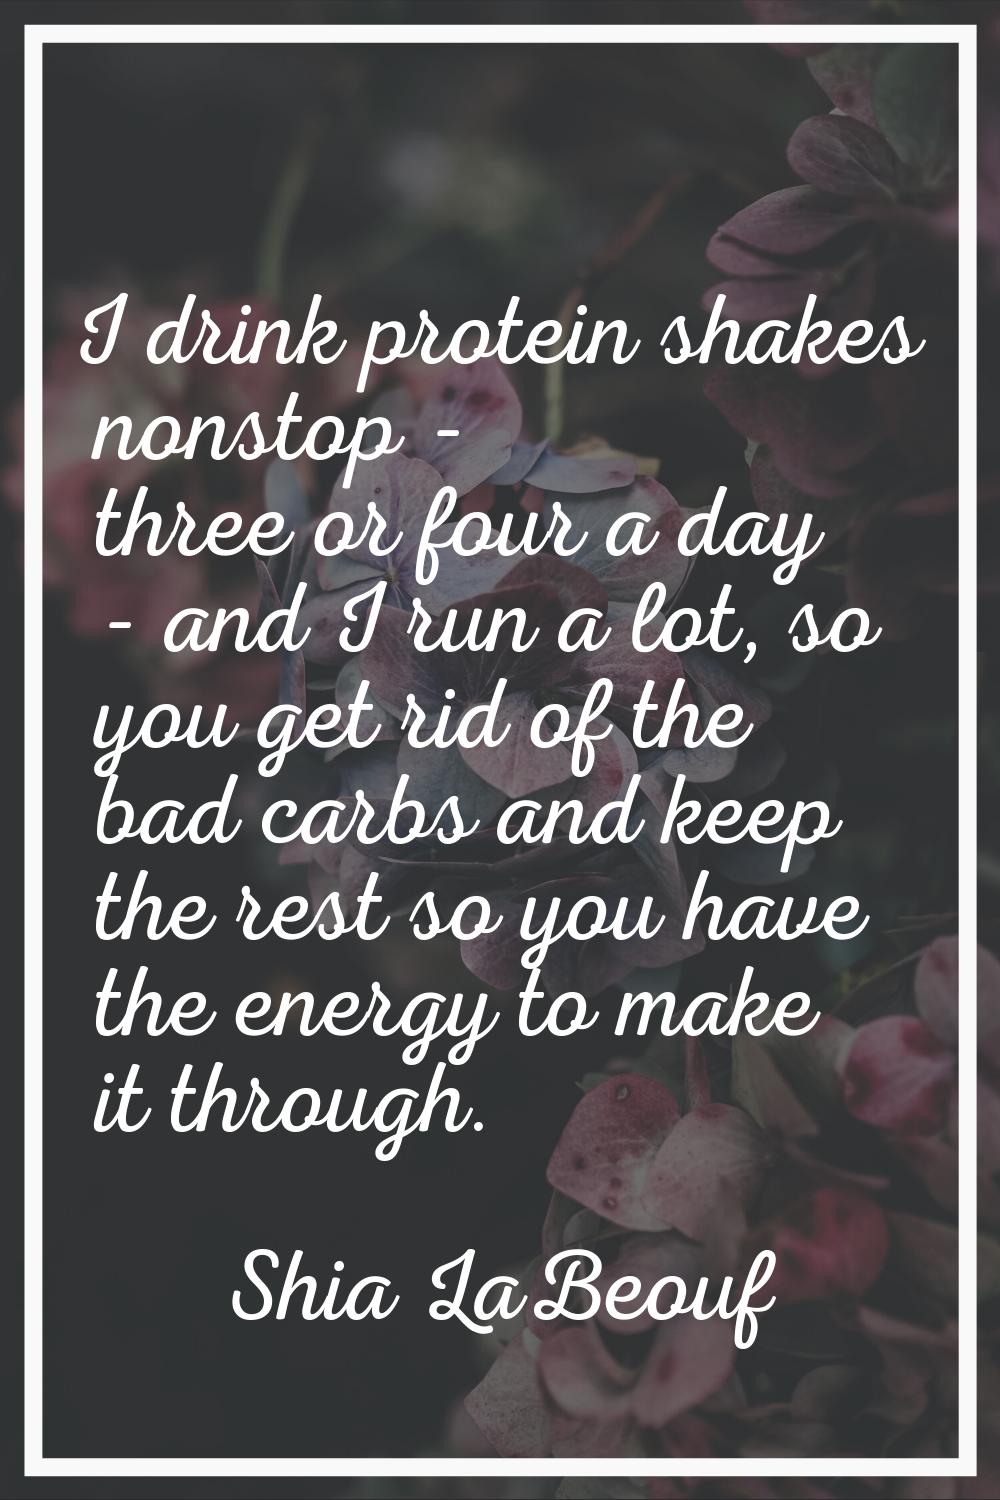 I drink protein shakes nonstop - three or four a day - and I run a lot, so you get rid of the bad c